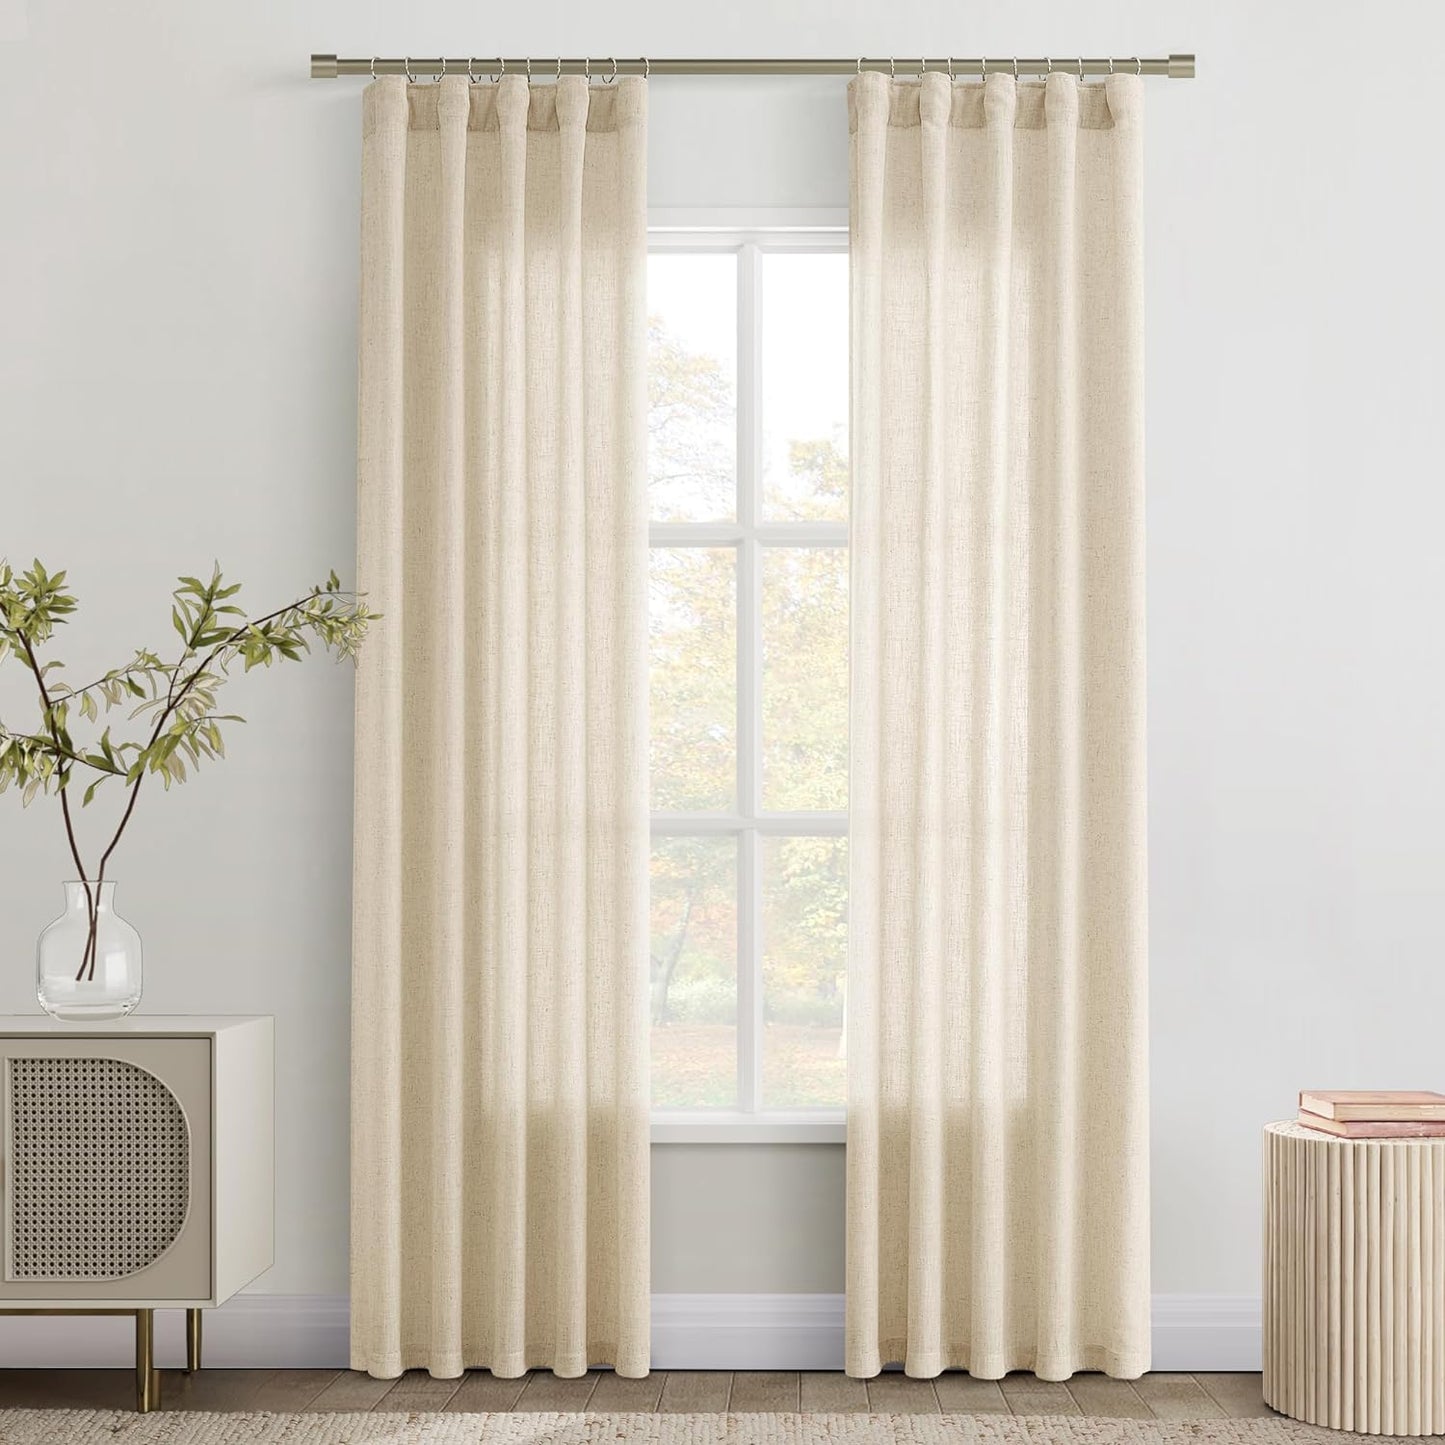 Joywell Natural Linen Cream Curtains 84 Inches Long for Living Room Bedroom Hook Belt Back Tab Pinch Pleated Light Filtering Ivory White Neutral Boho Modern Farmhouse Linen Drapes 84 Length 2 Panels  Joywell Sand Beige 38W X 80L Inch X 2 Panels 